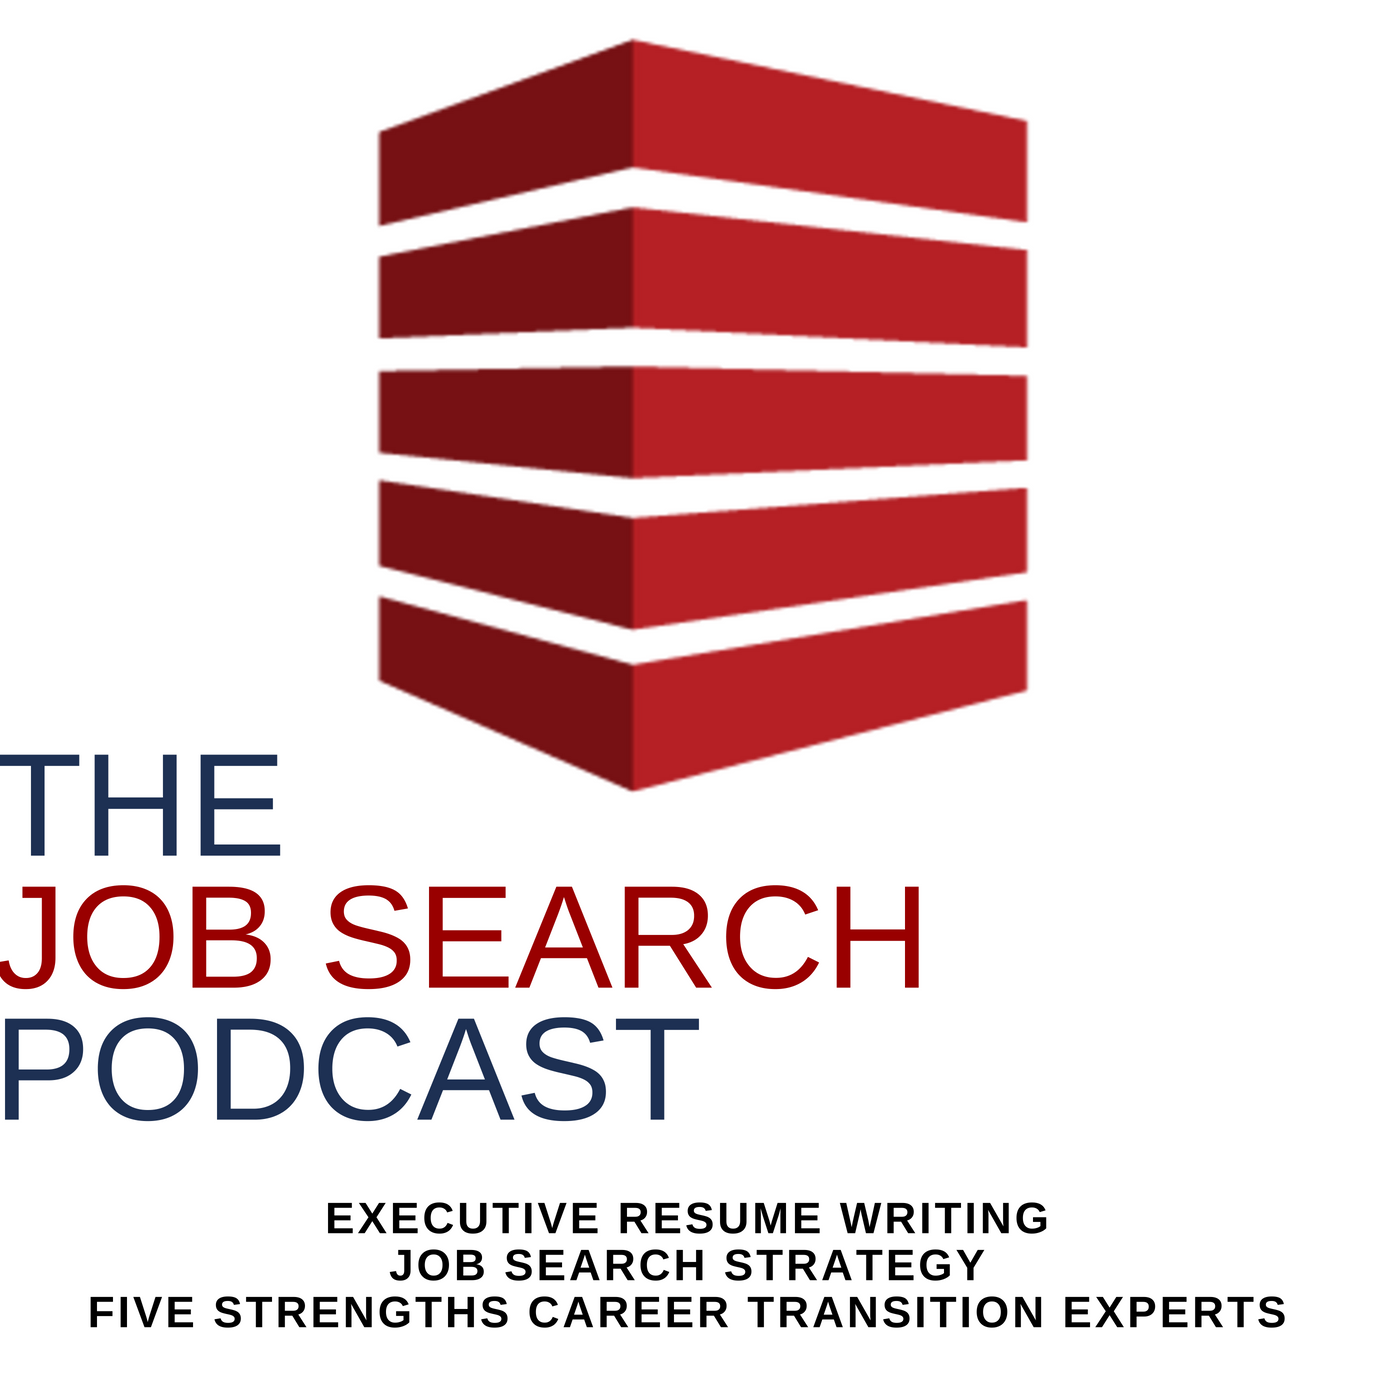 Top 6 Executive Resume Mistakes that Say "Don't Hire Me" | The Job Search Podcast